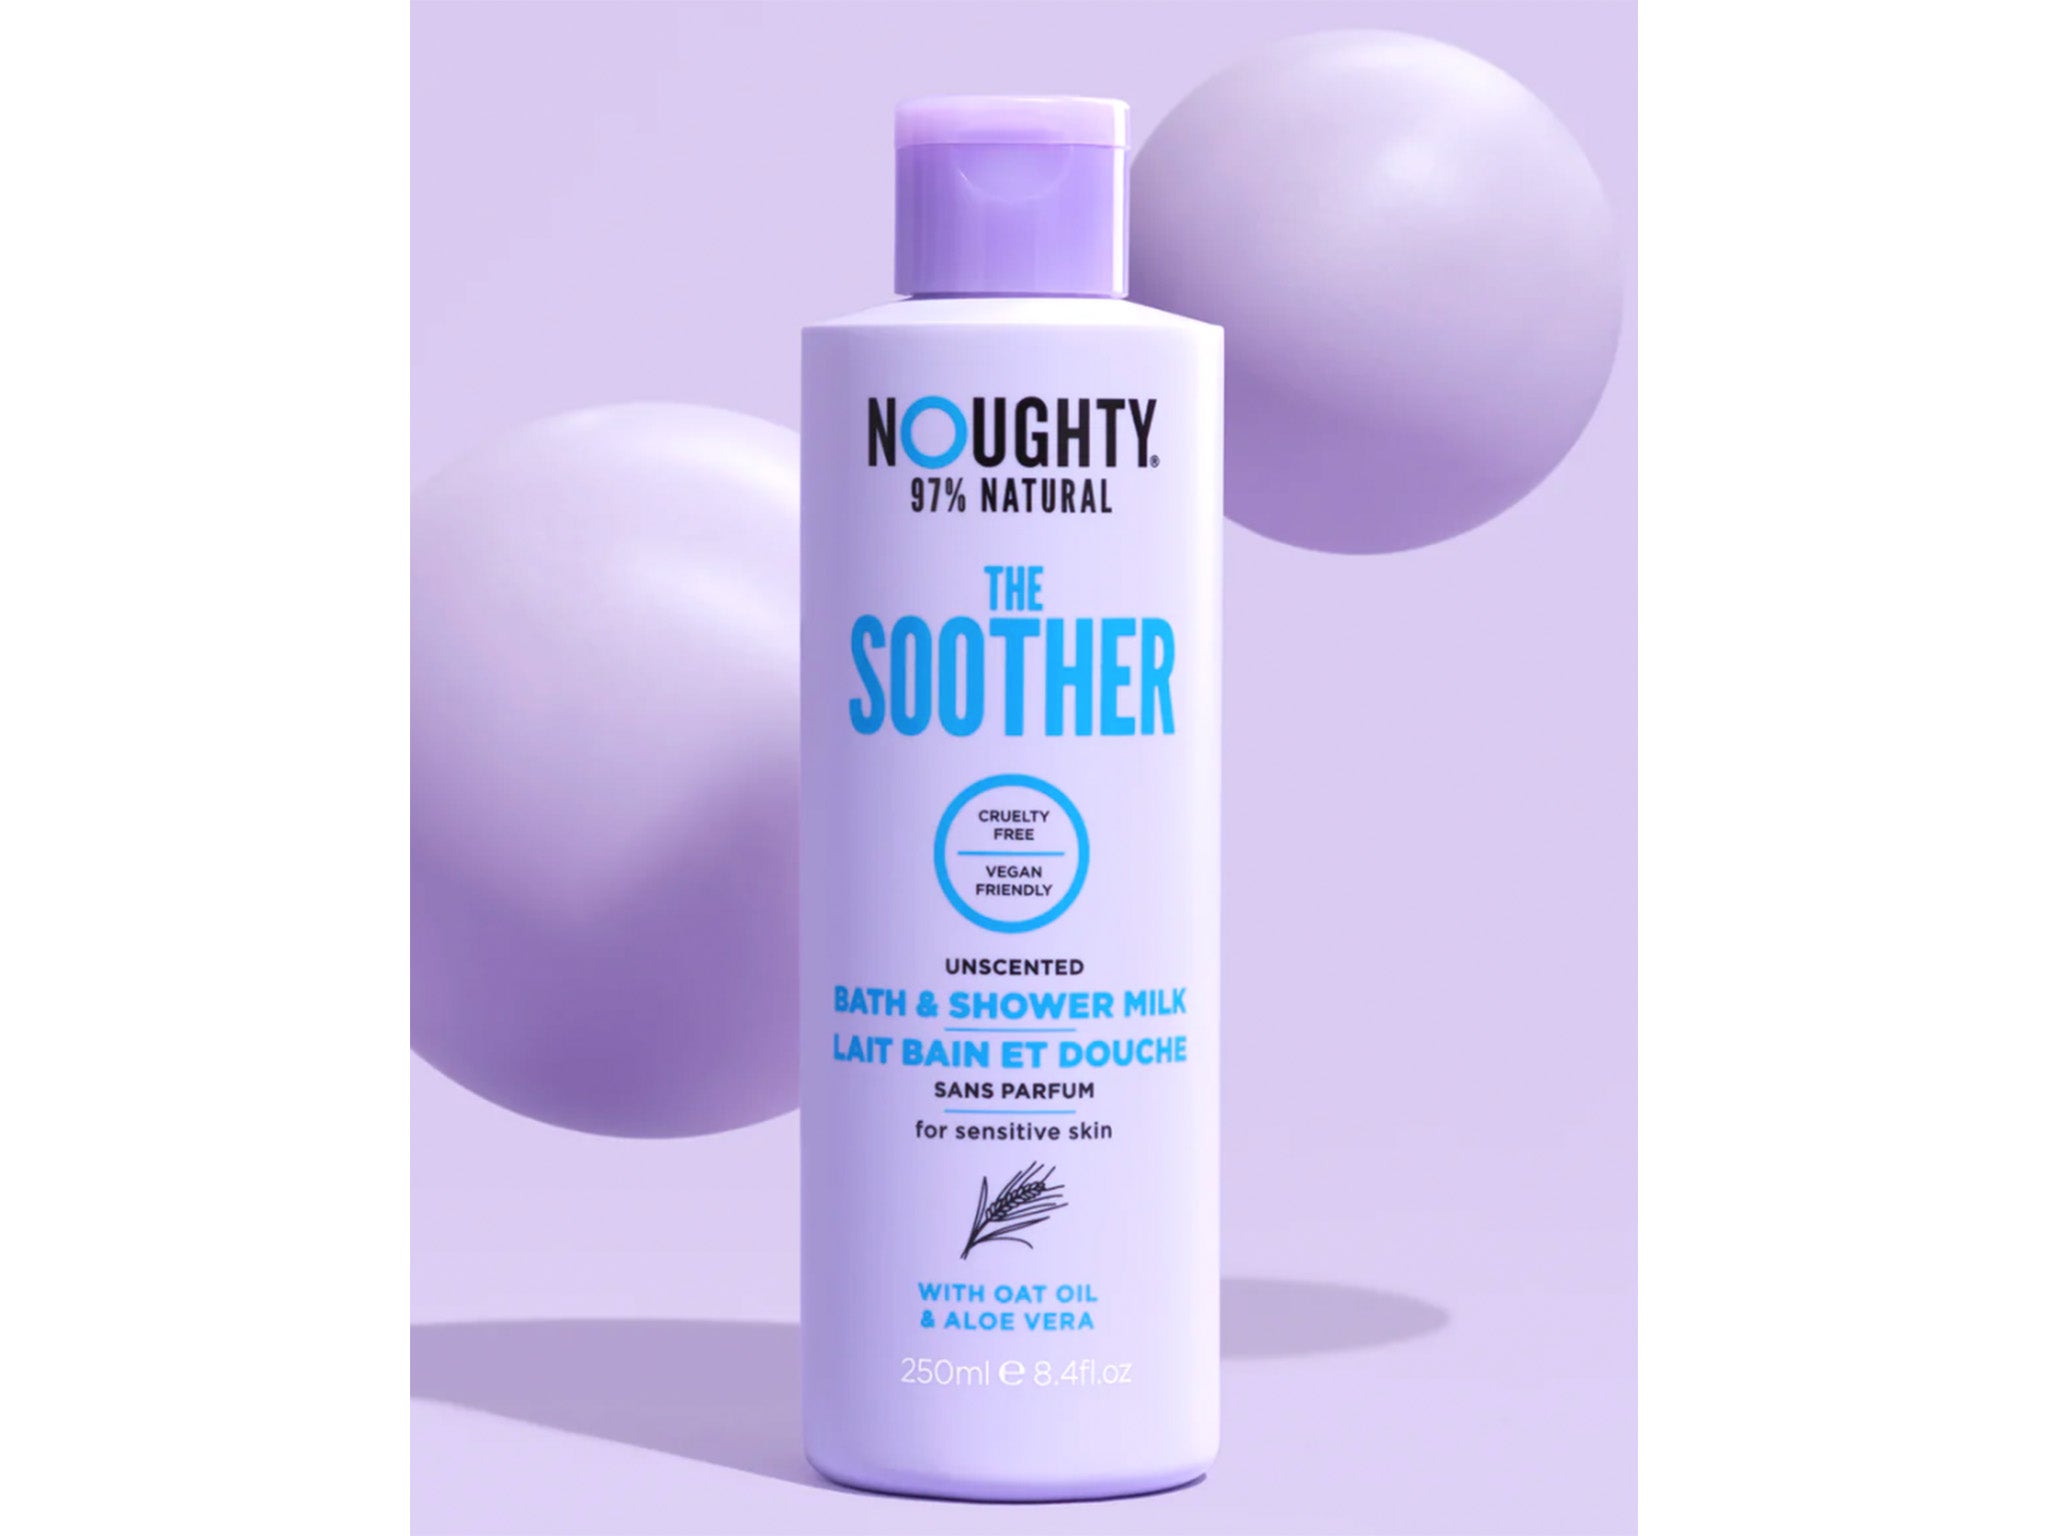 Noughty the soother unscented bath and shower milk